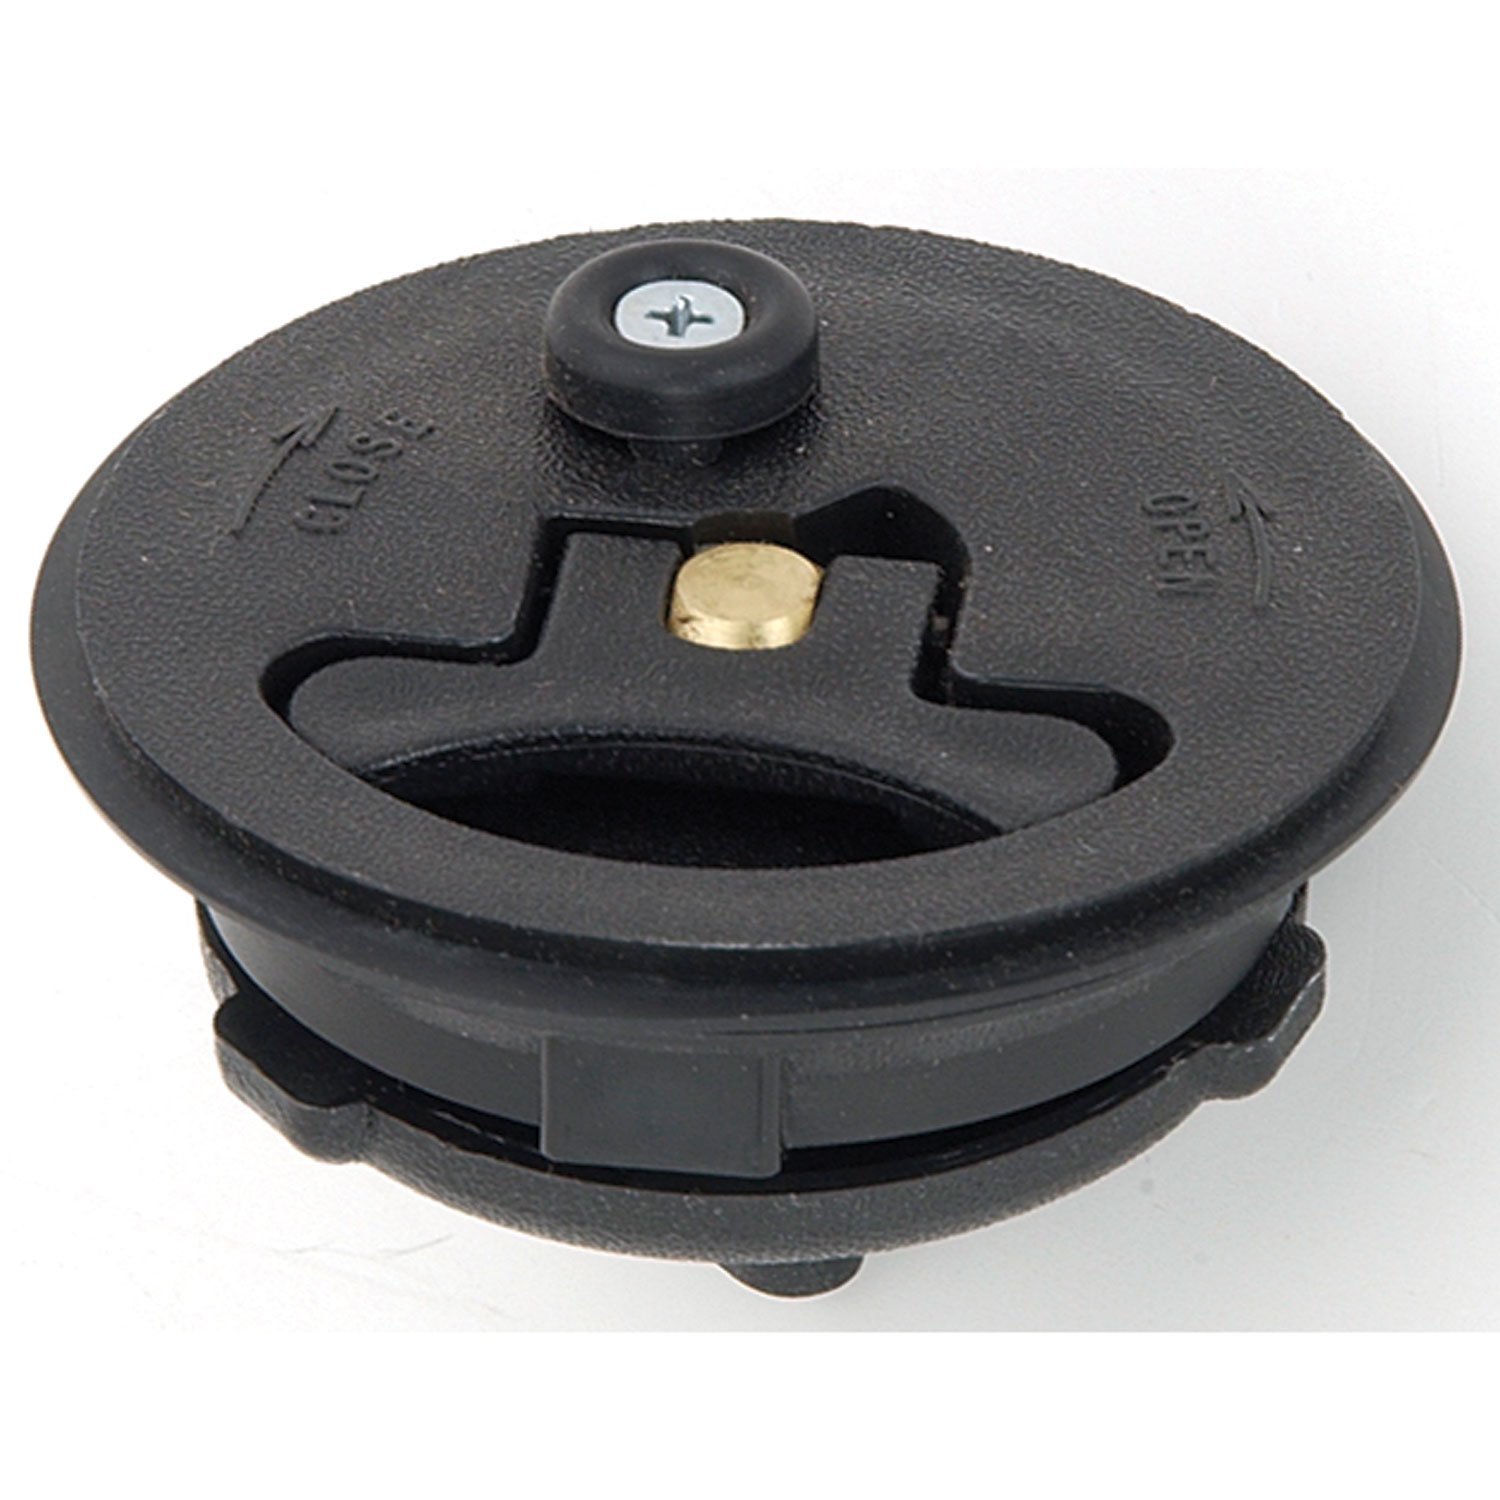 Replacement Fuel Cell Cap For 1 to 20